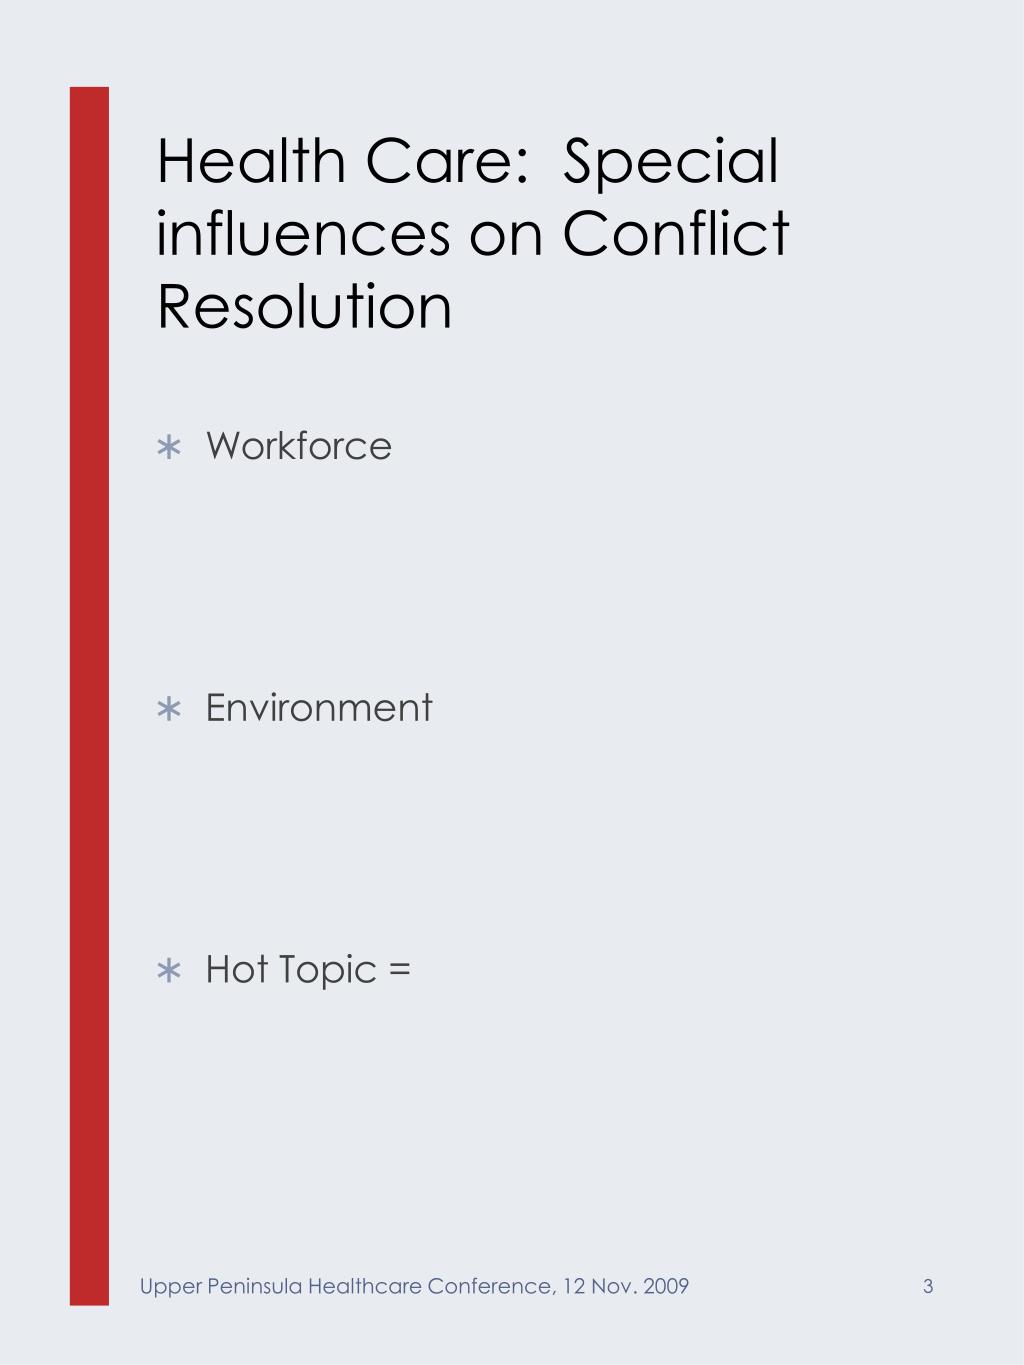 conflict in healthcare a literature review